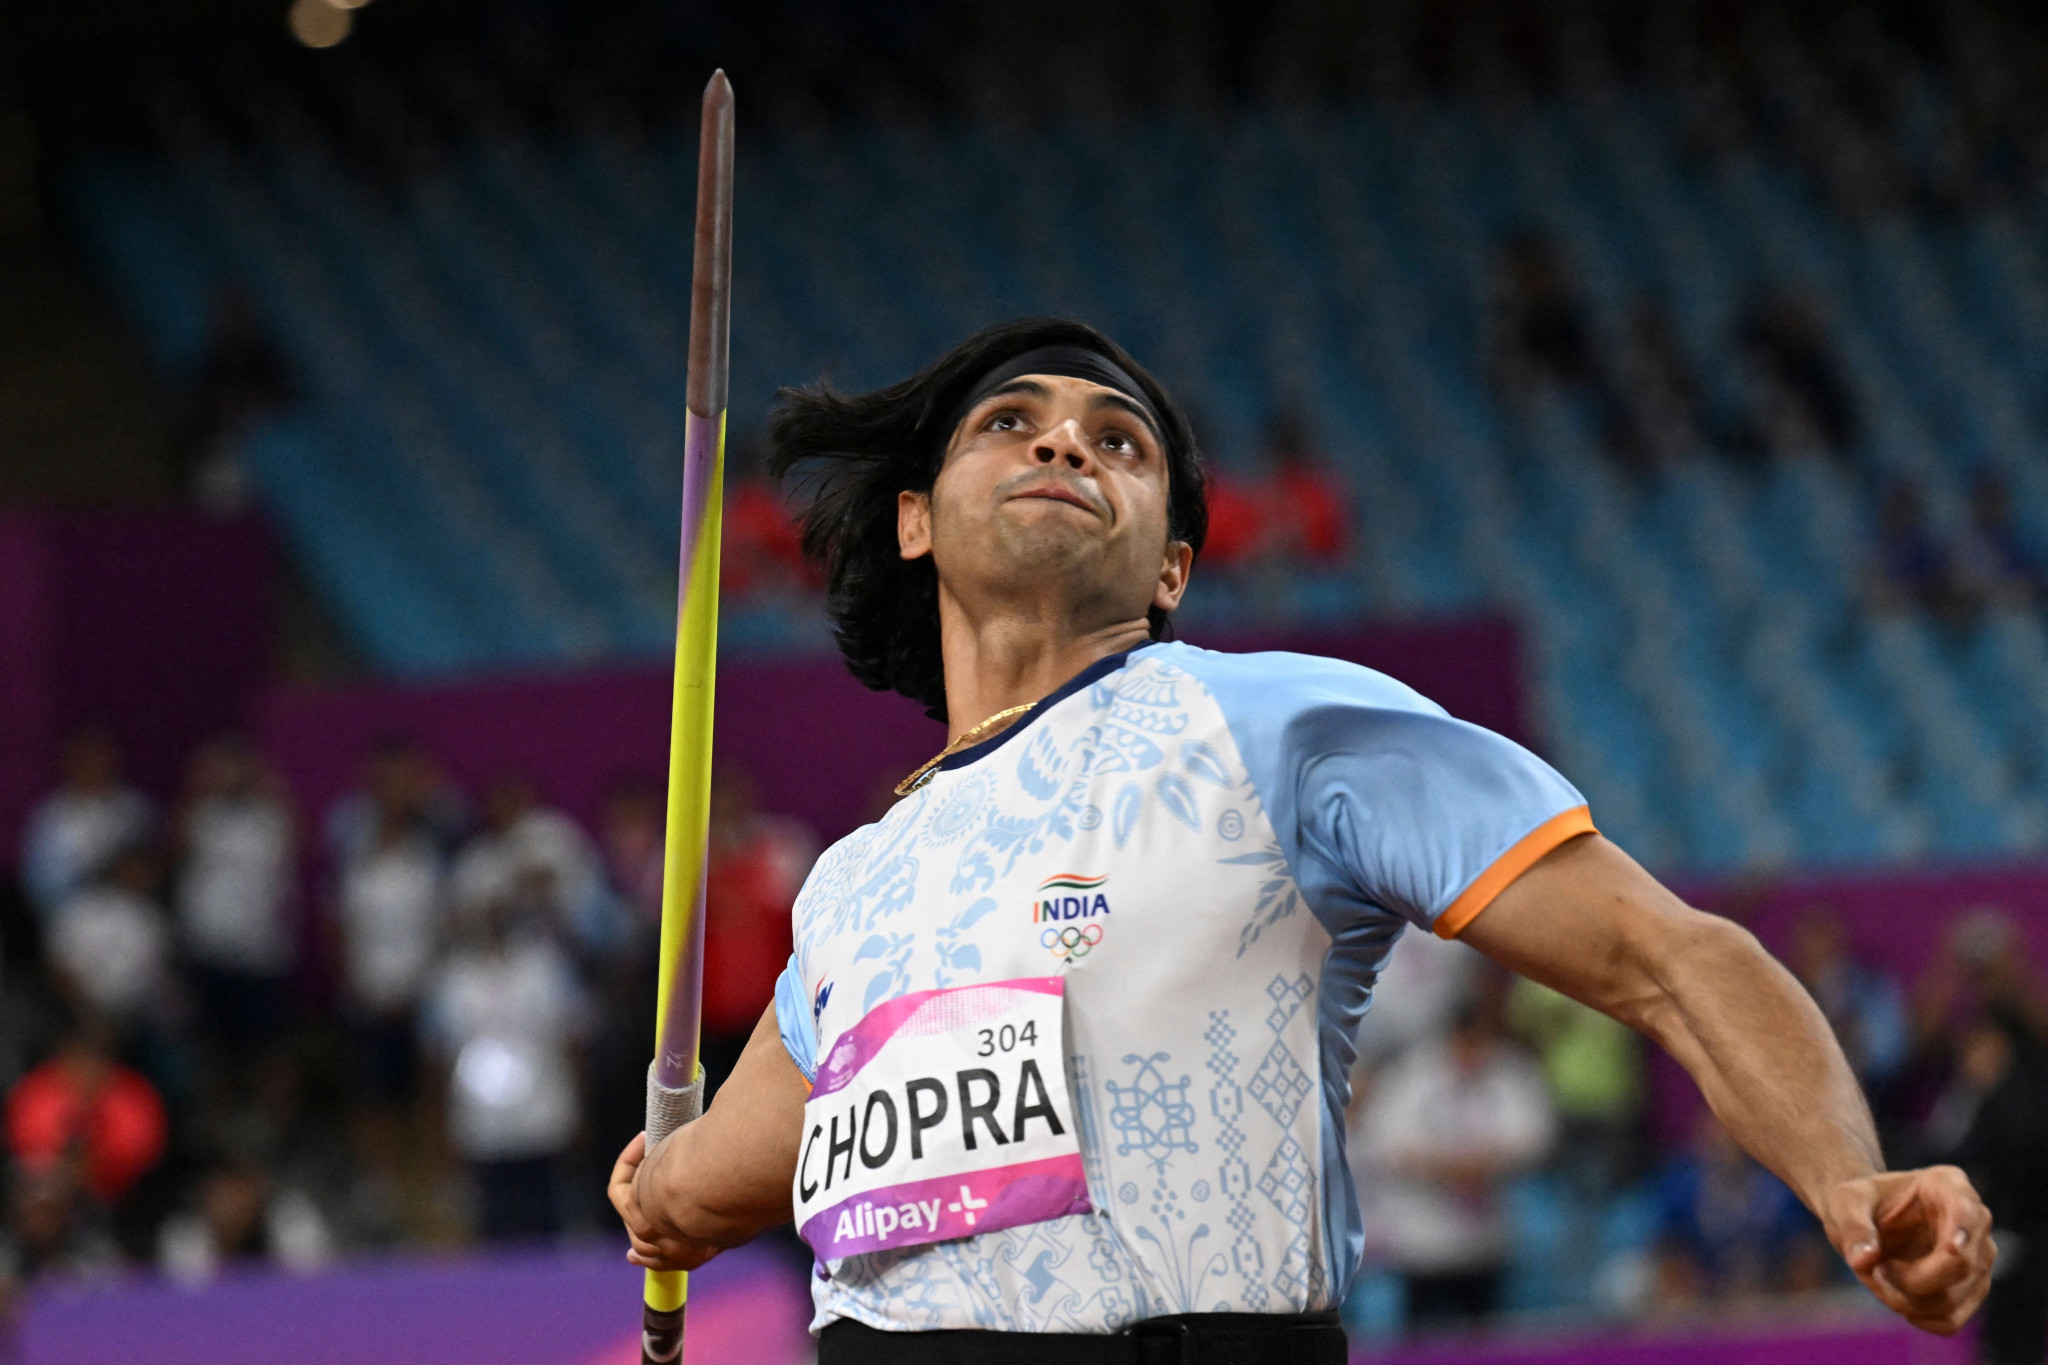 Chopra and Barshim rise to challenge on thrilling day at Hangzhou 2022